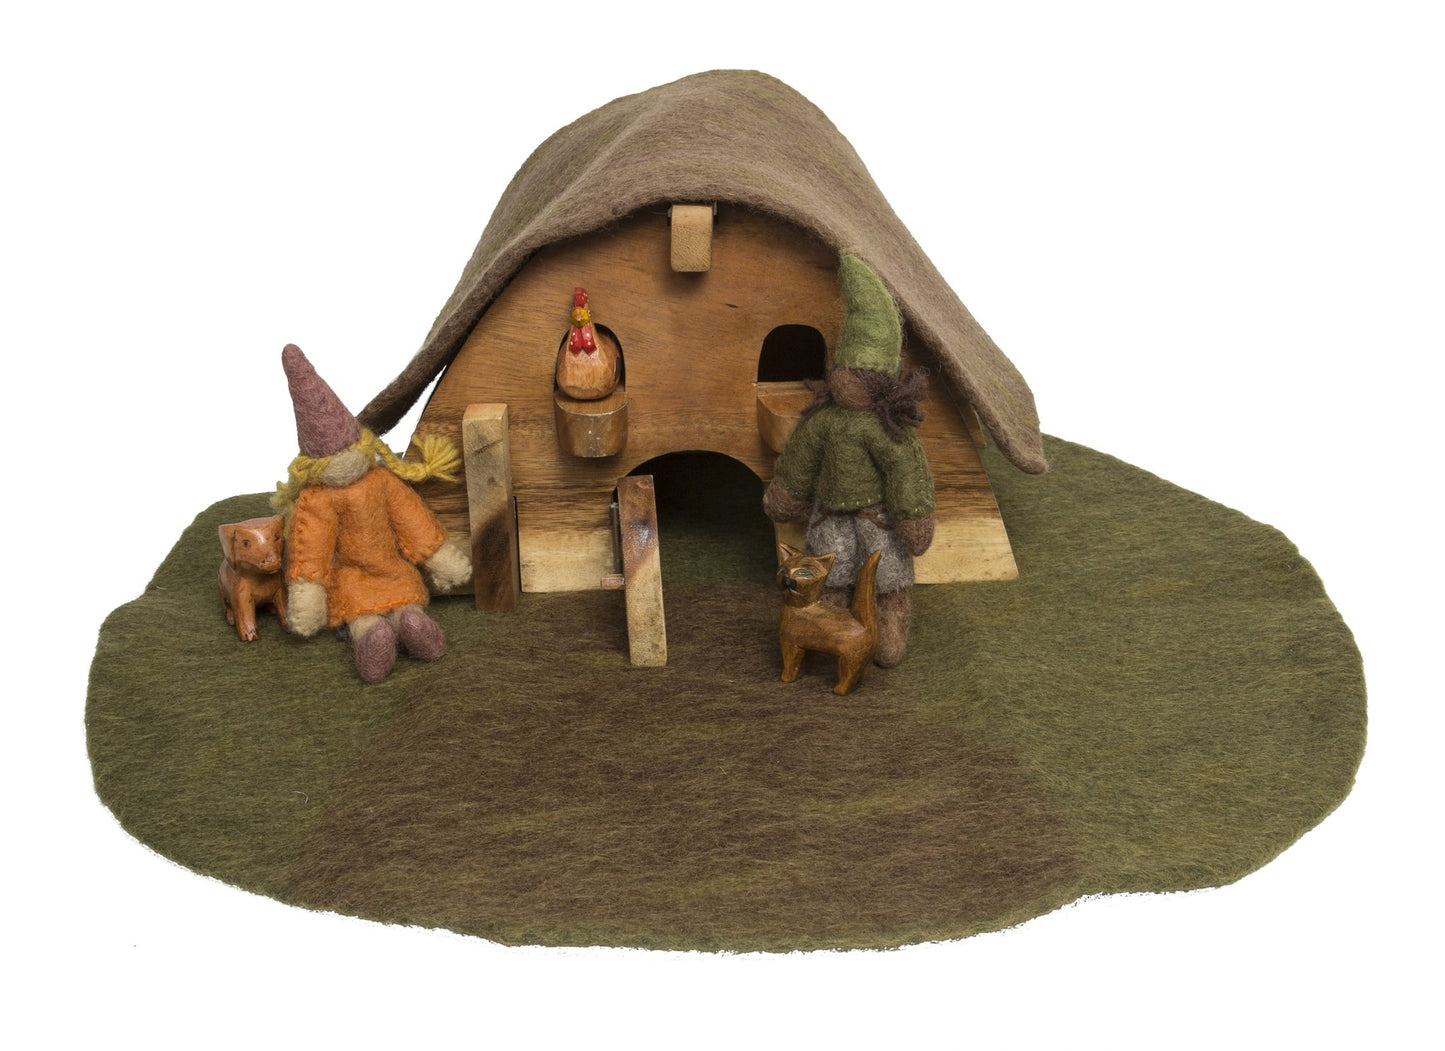 Gnome house set with gnomes